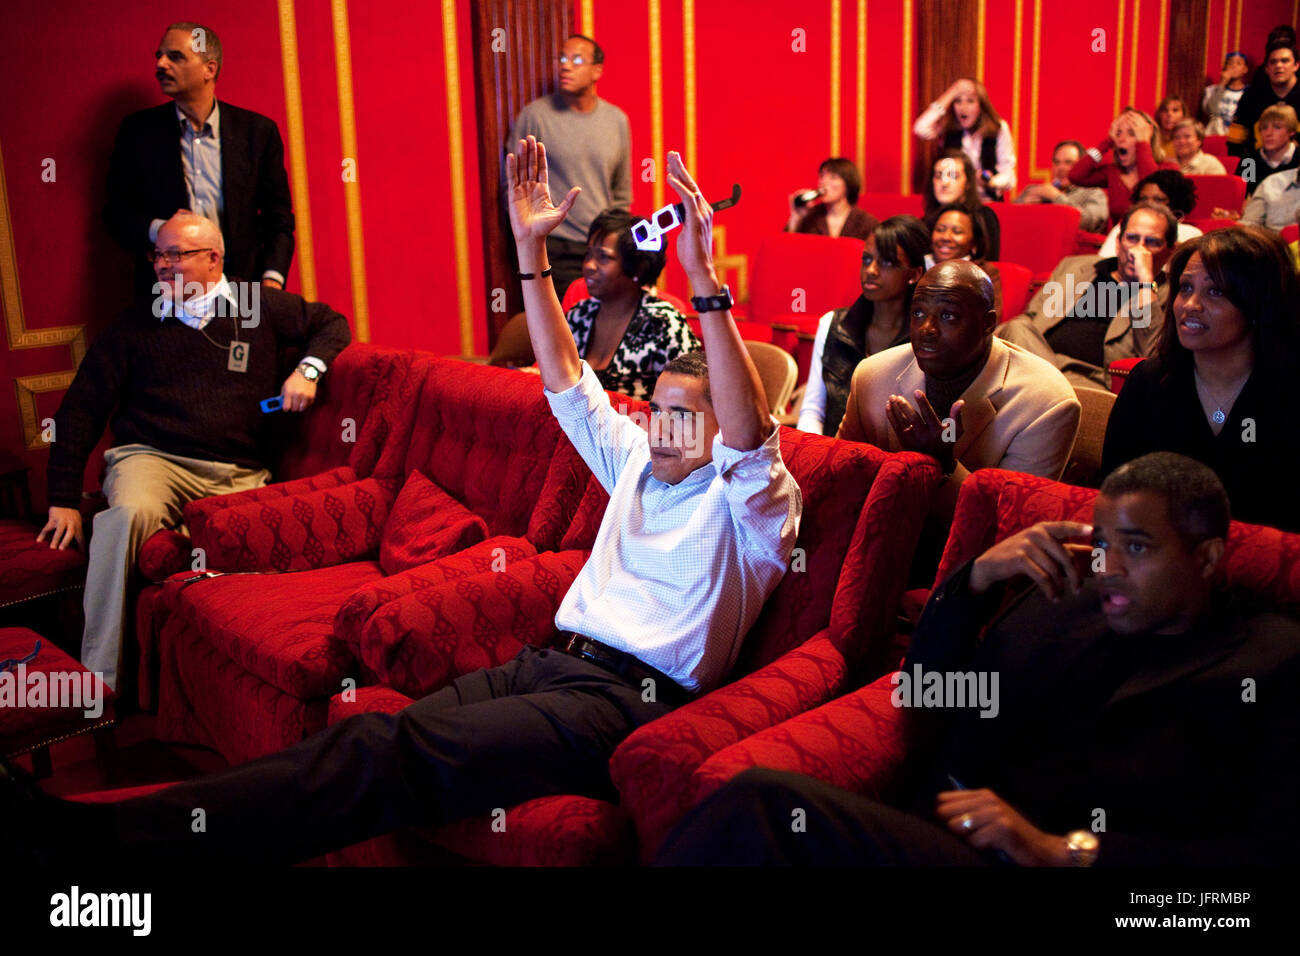 President Barack Obama holds 3-D glasses while watching the Super Bowl game at a Super Bowl Party in the family theater of the White House. Guests included family, friends, staff members and bipartisan members of Congress, 2/1/09.  Official White House Photo by Pete Souza Stock Photo